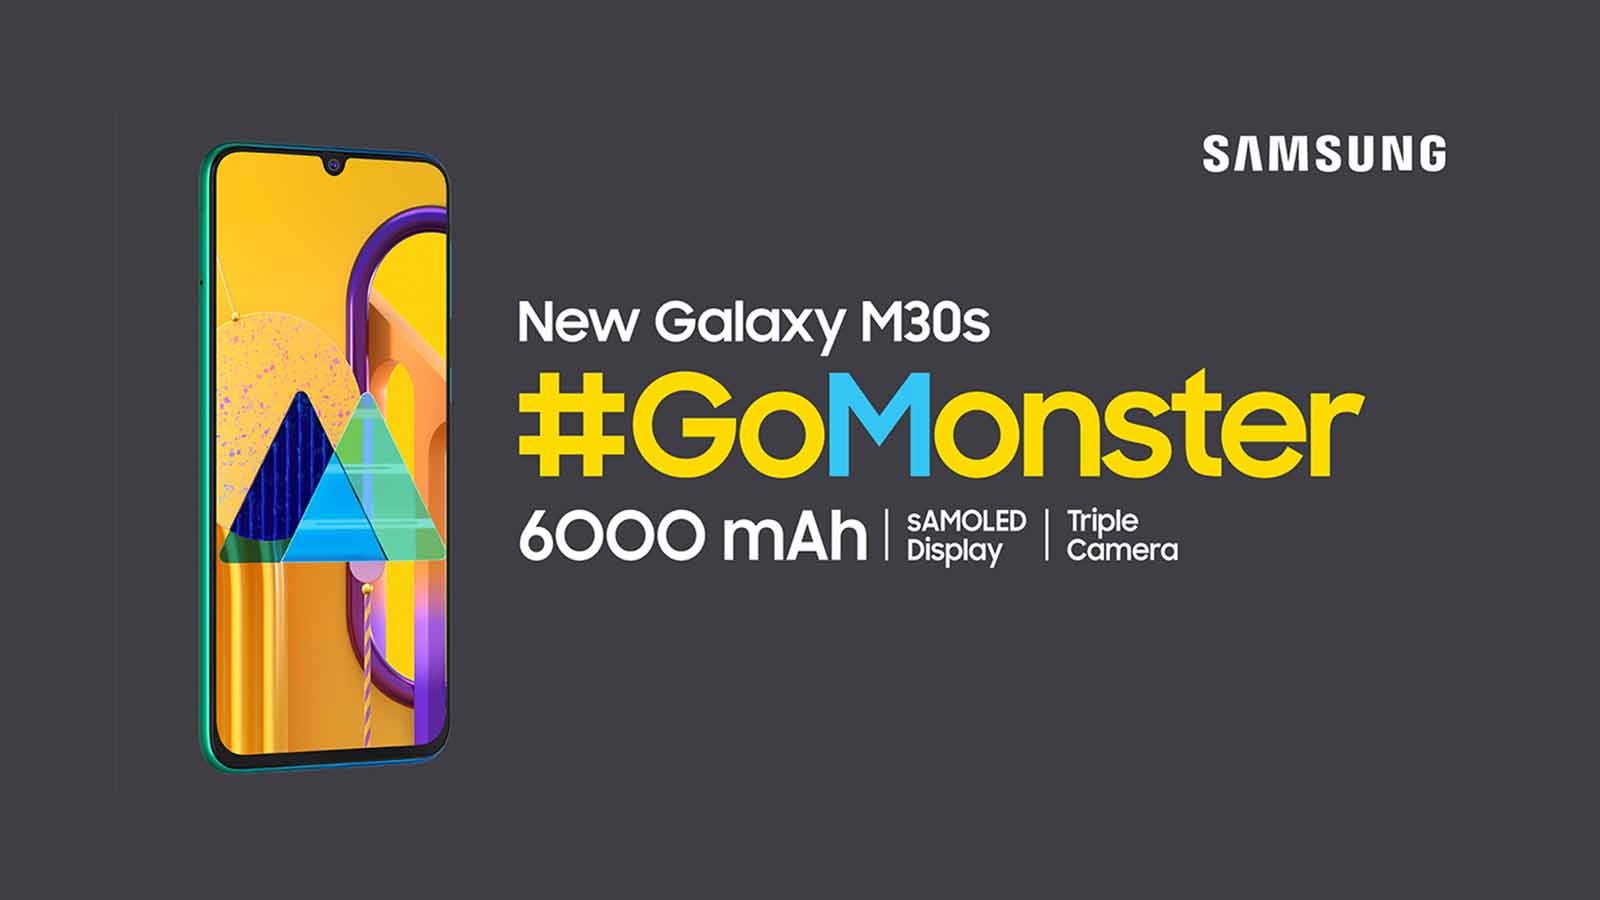 GoMonster with 6000 mAh of Samsung Galaxy M30s - Times of India Videos